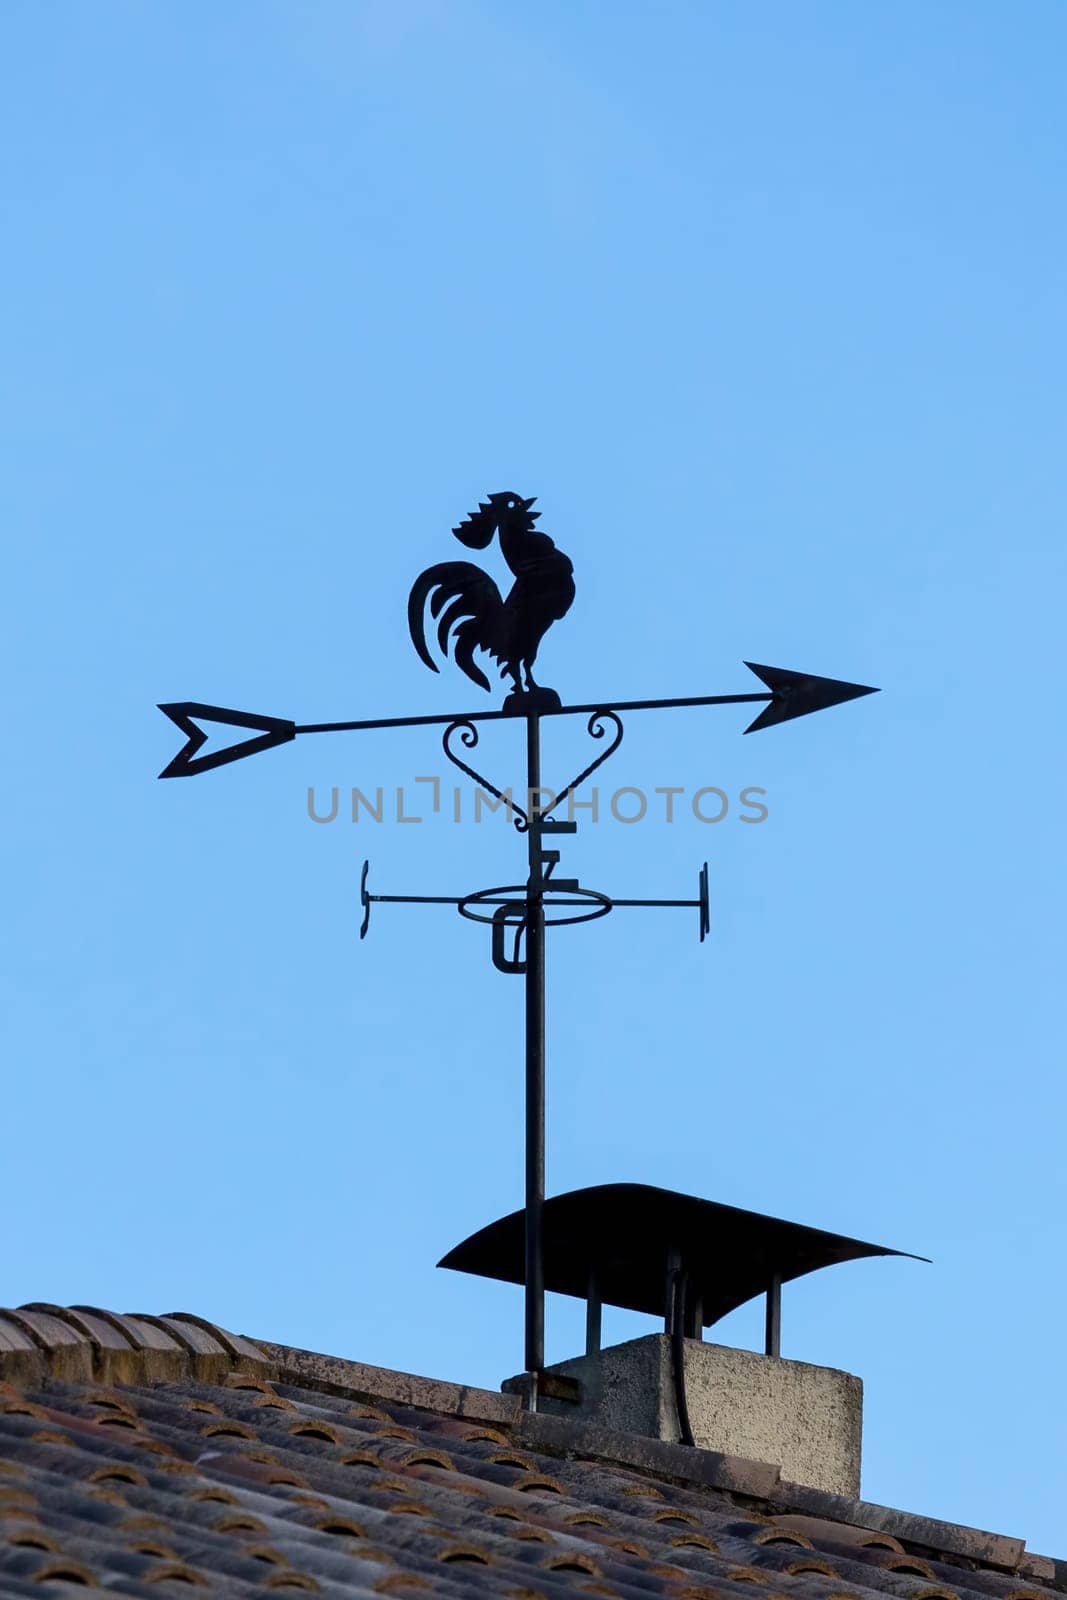 There is a nice weathercock on the roof